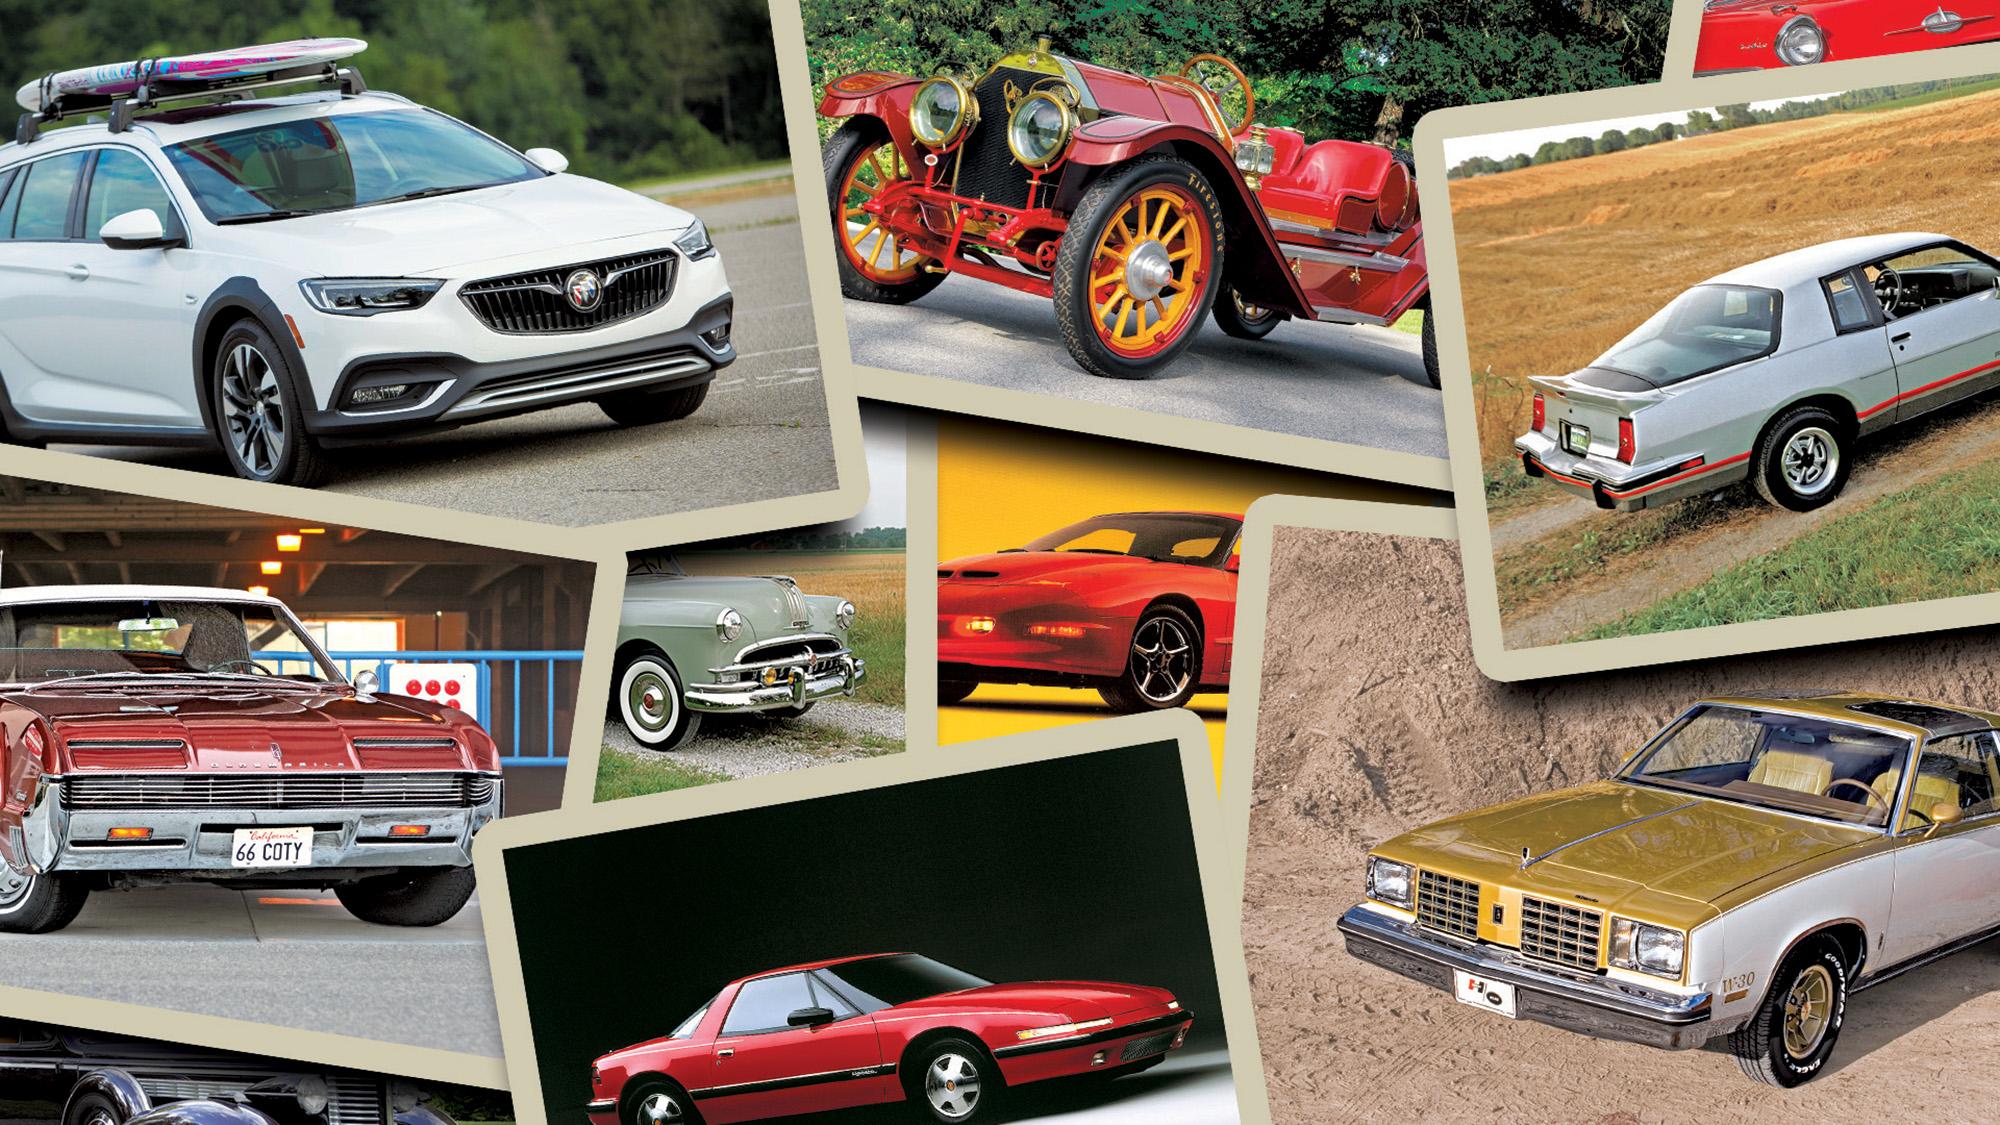 B-O-P breakthroughs: 10 uncommon or innovative vehicles from Buick, Oldsmobile, Pontiac